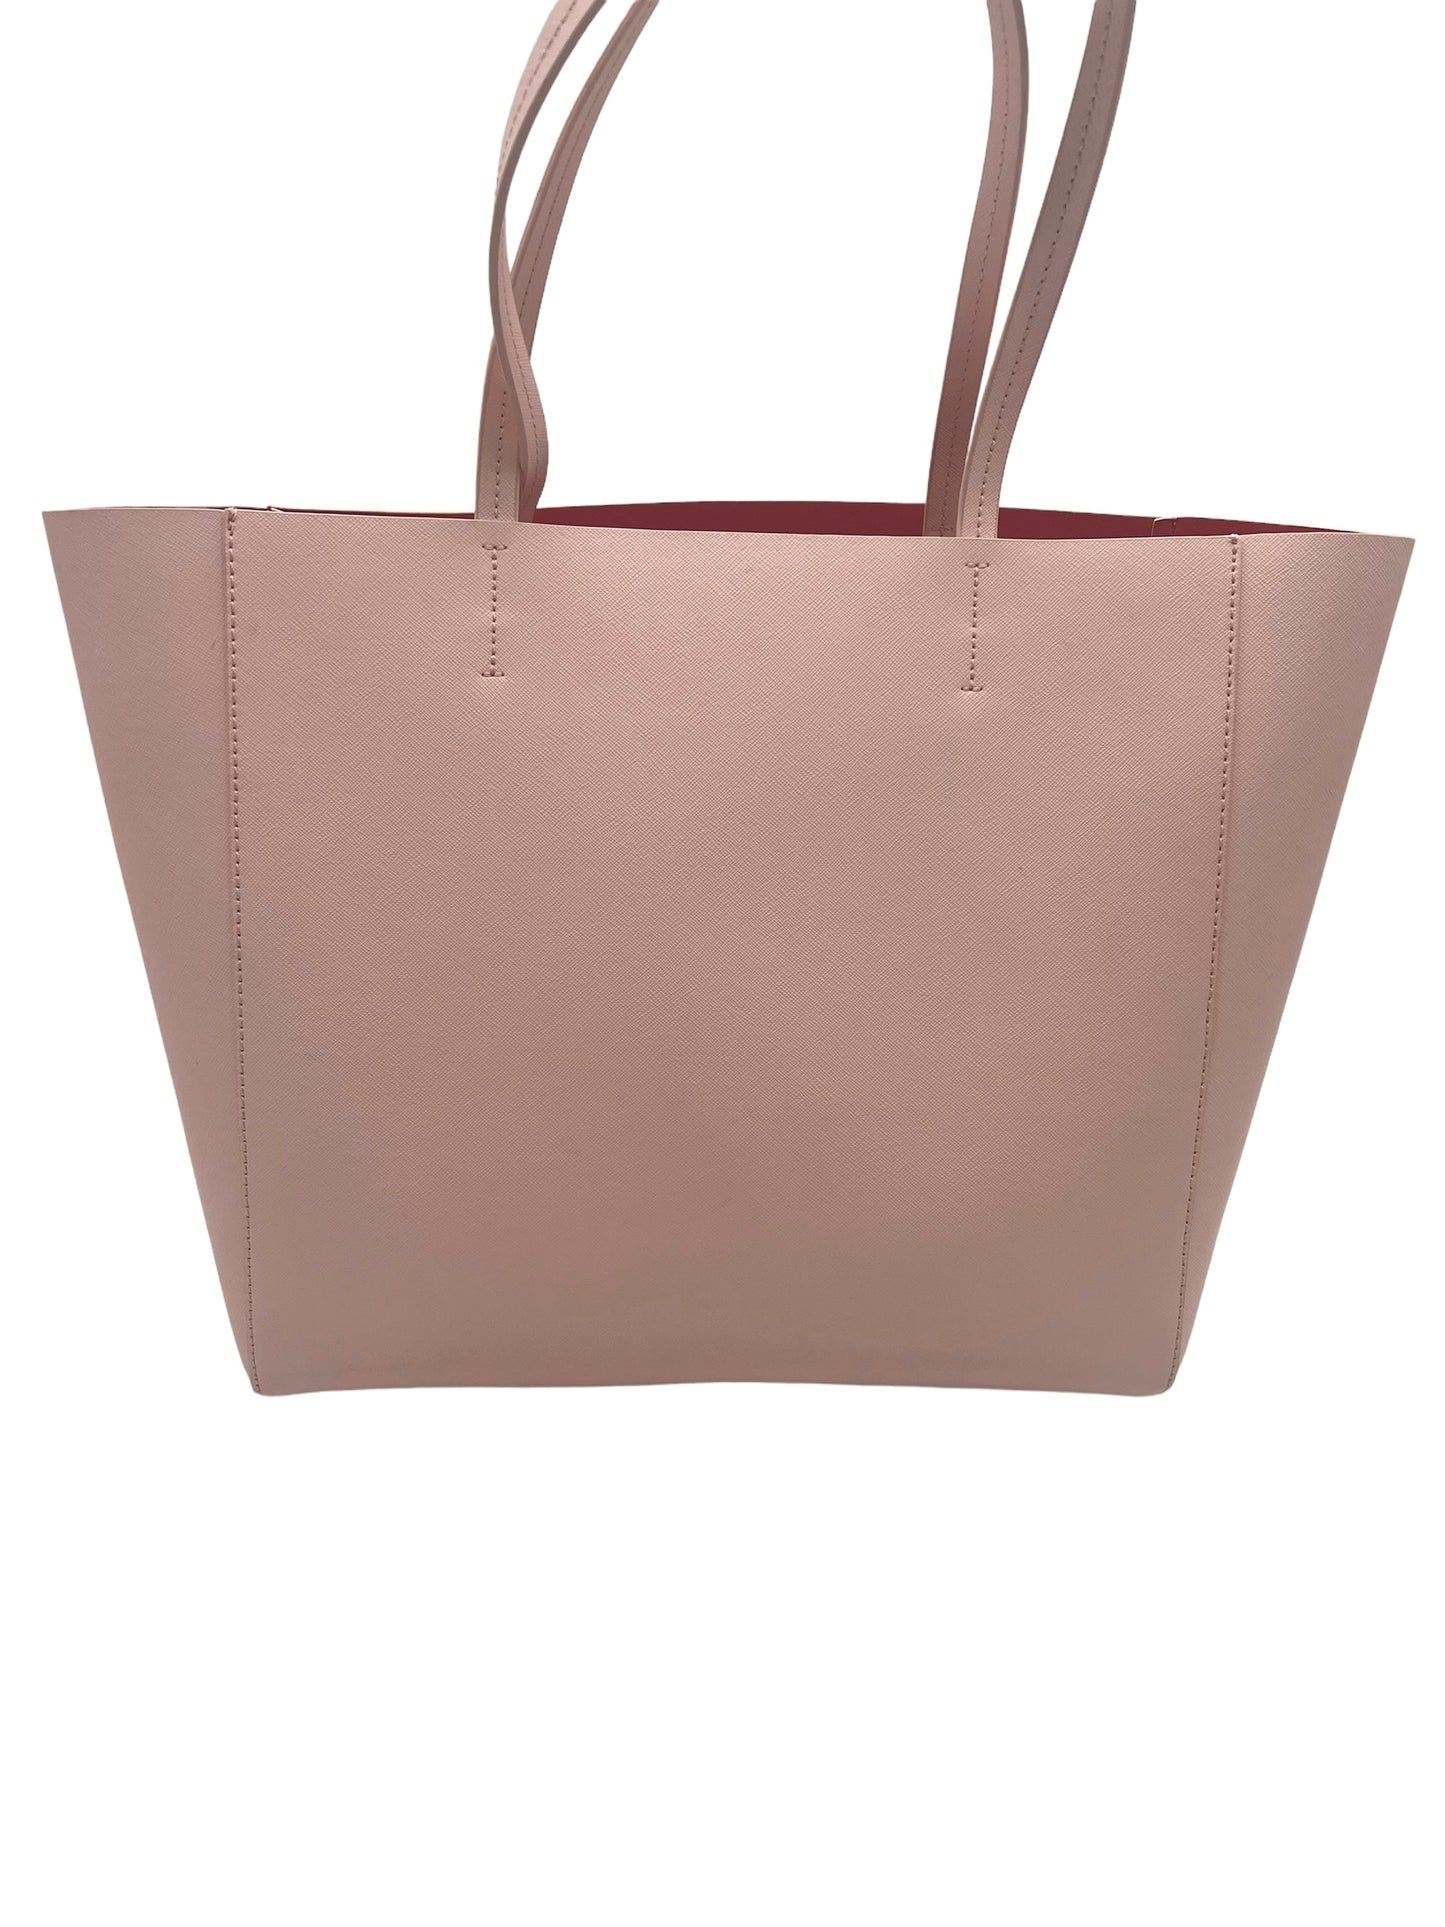 Kate Spade Pink Hallie 'Skirt The Rules' Perforated Tote